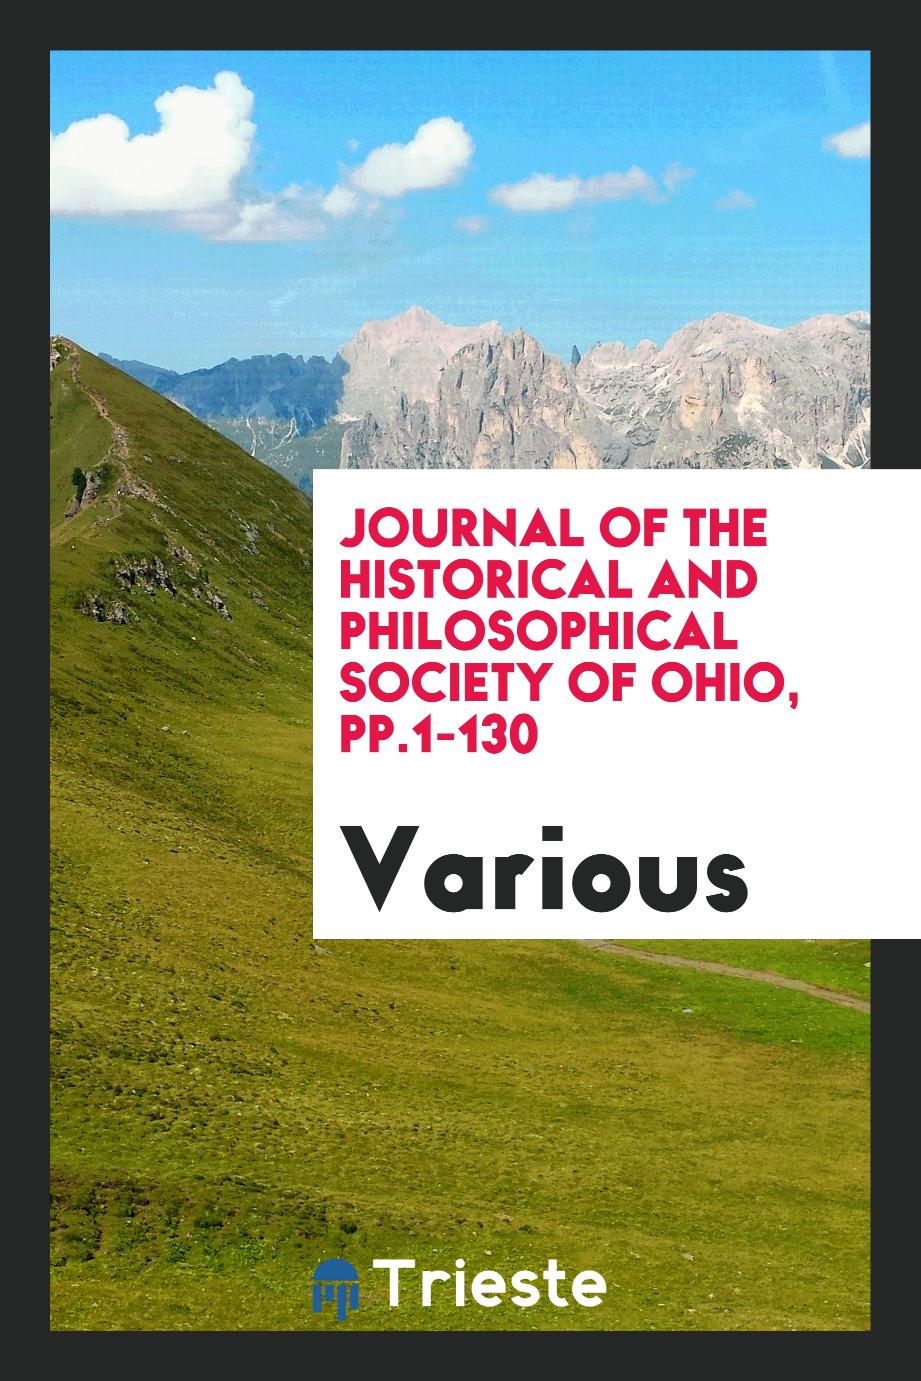 Journal of the Historical and Philosophical Society of Ohio, pp.1-130